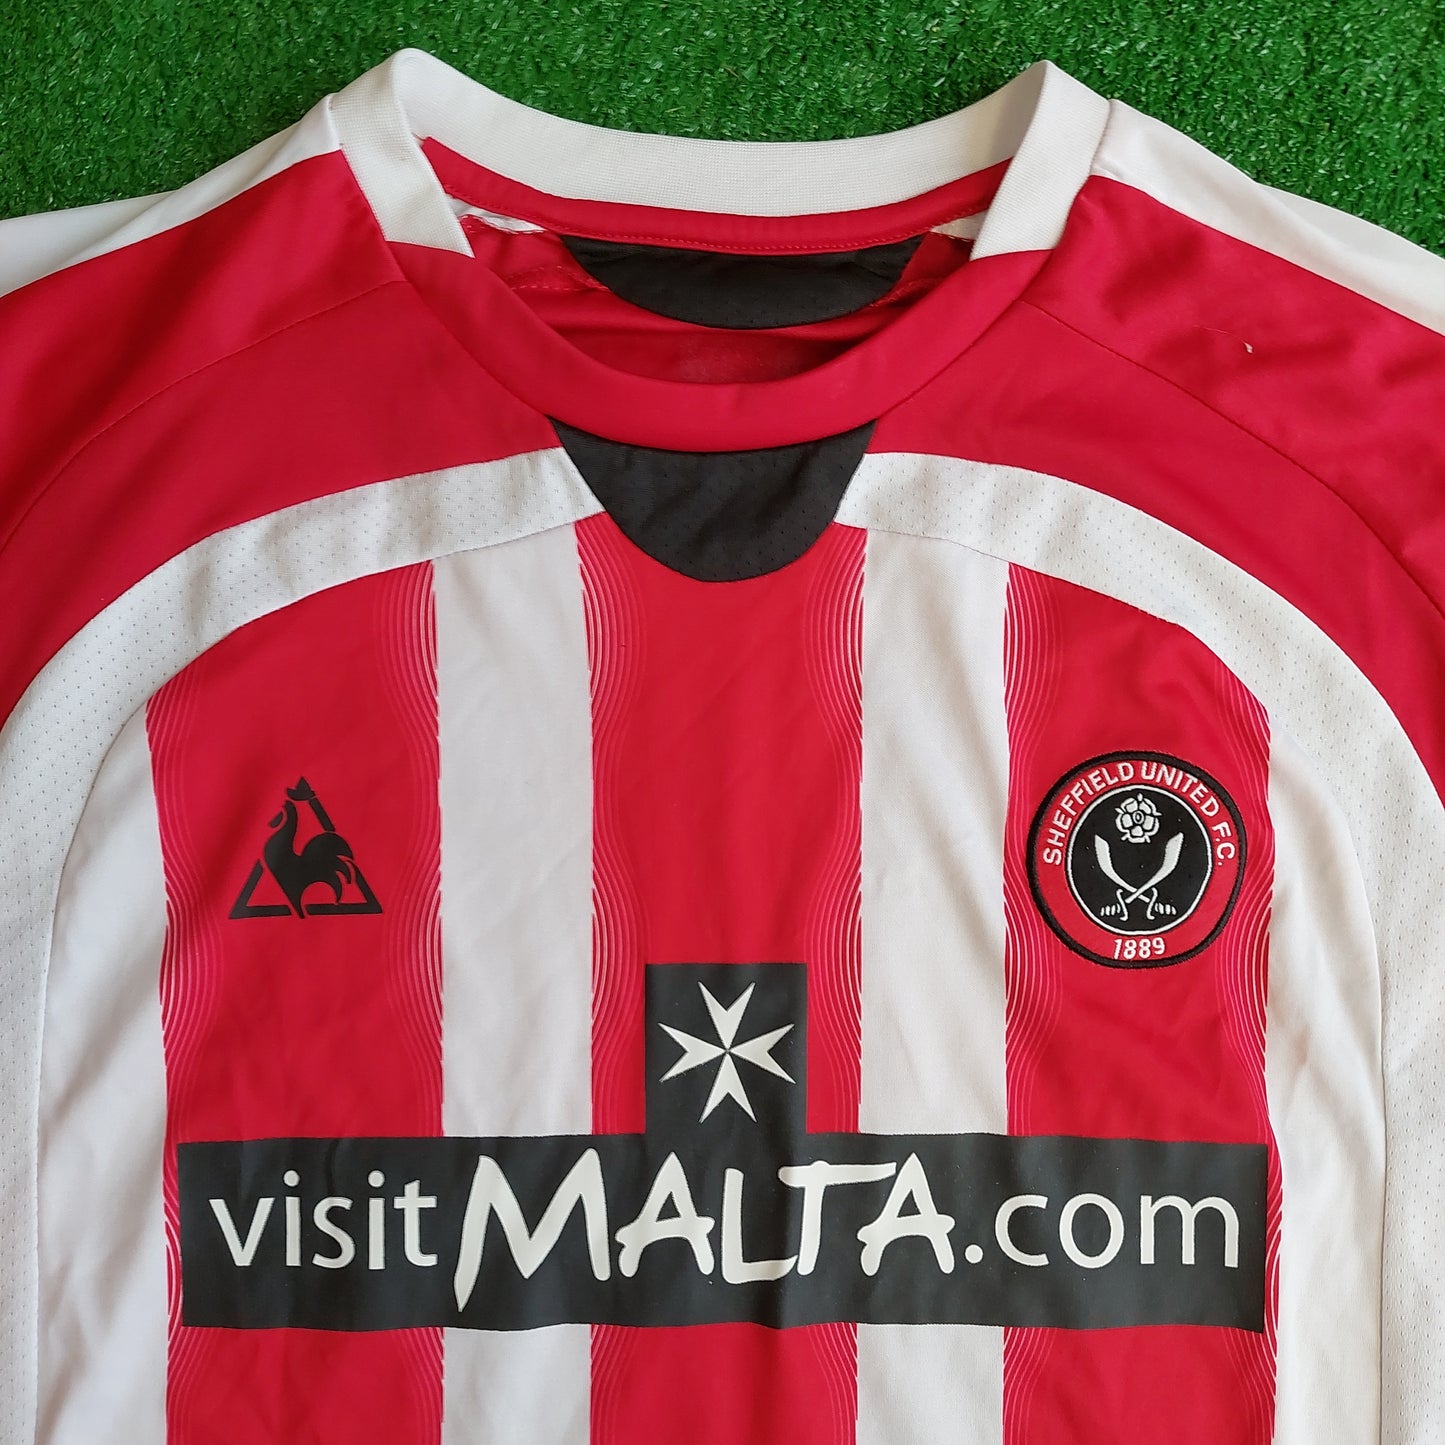 Sheffield United 2008/09 Home Shirt (Very Good) - Size L